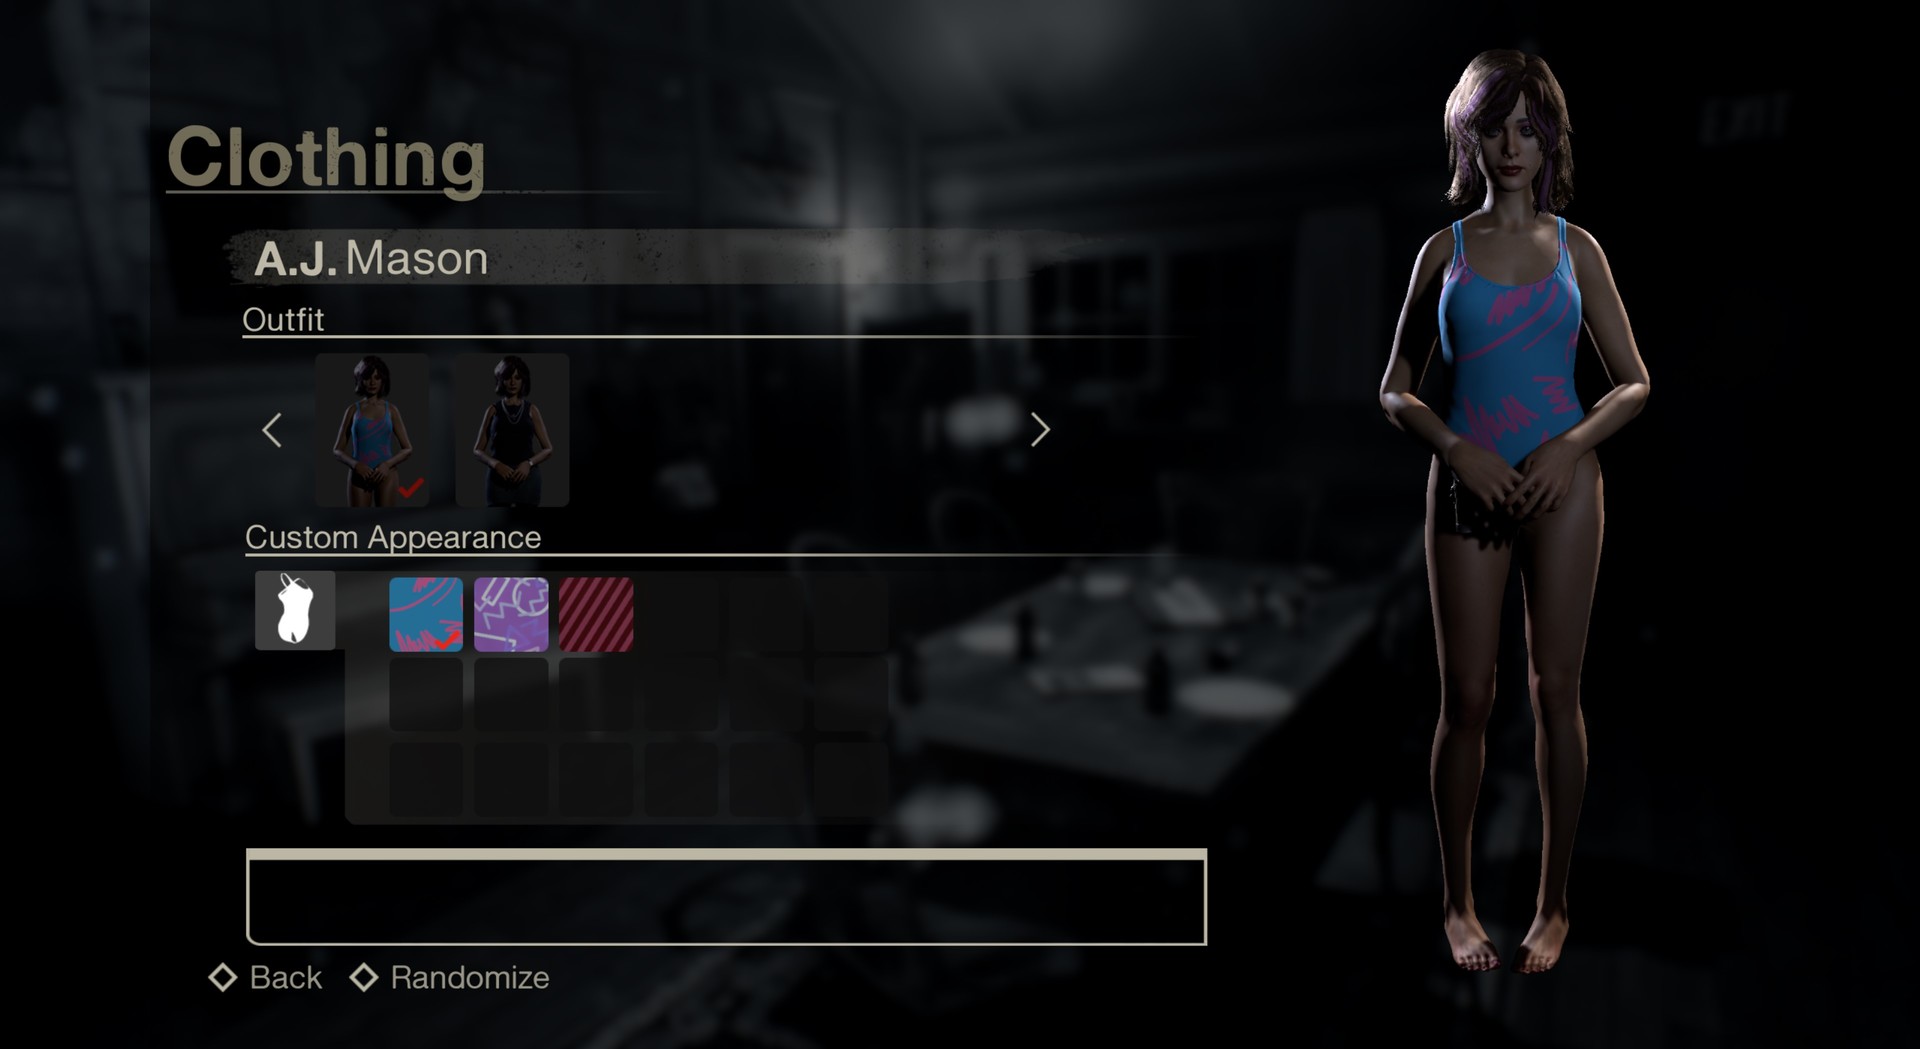 Friday the 13th: The Game - Spring Break 1984 Clothing Pack Featured Screenshot #1